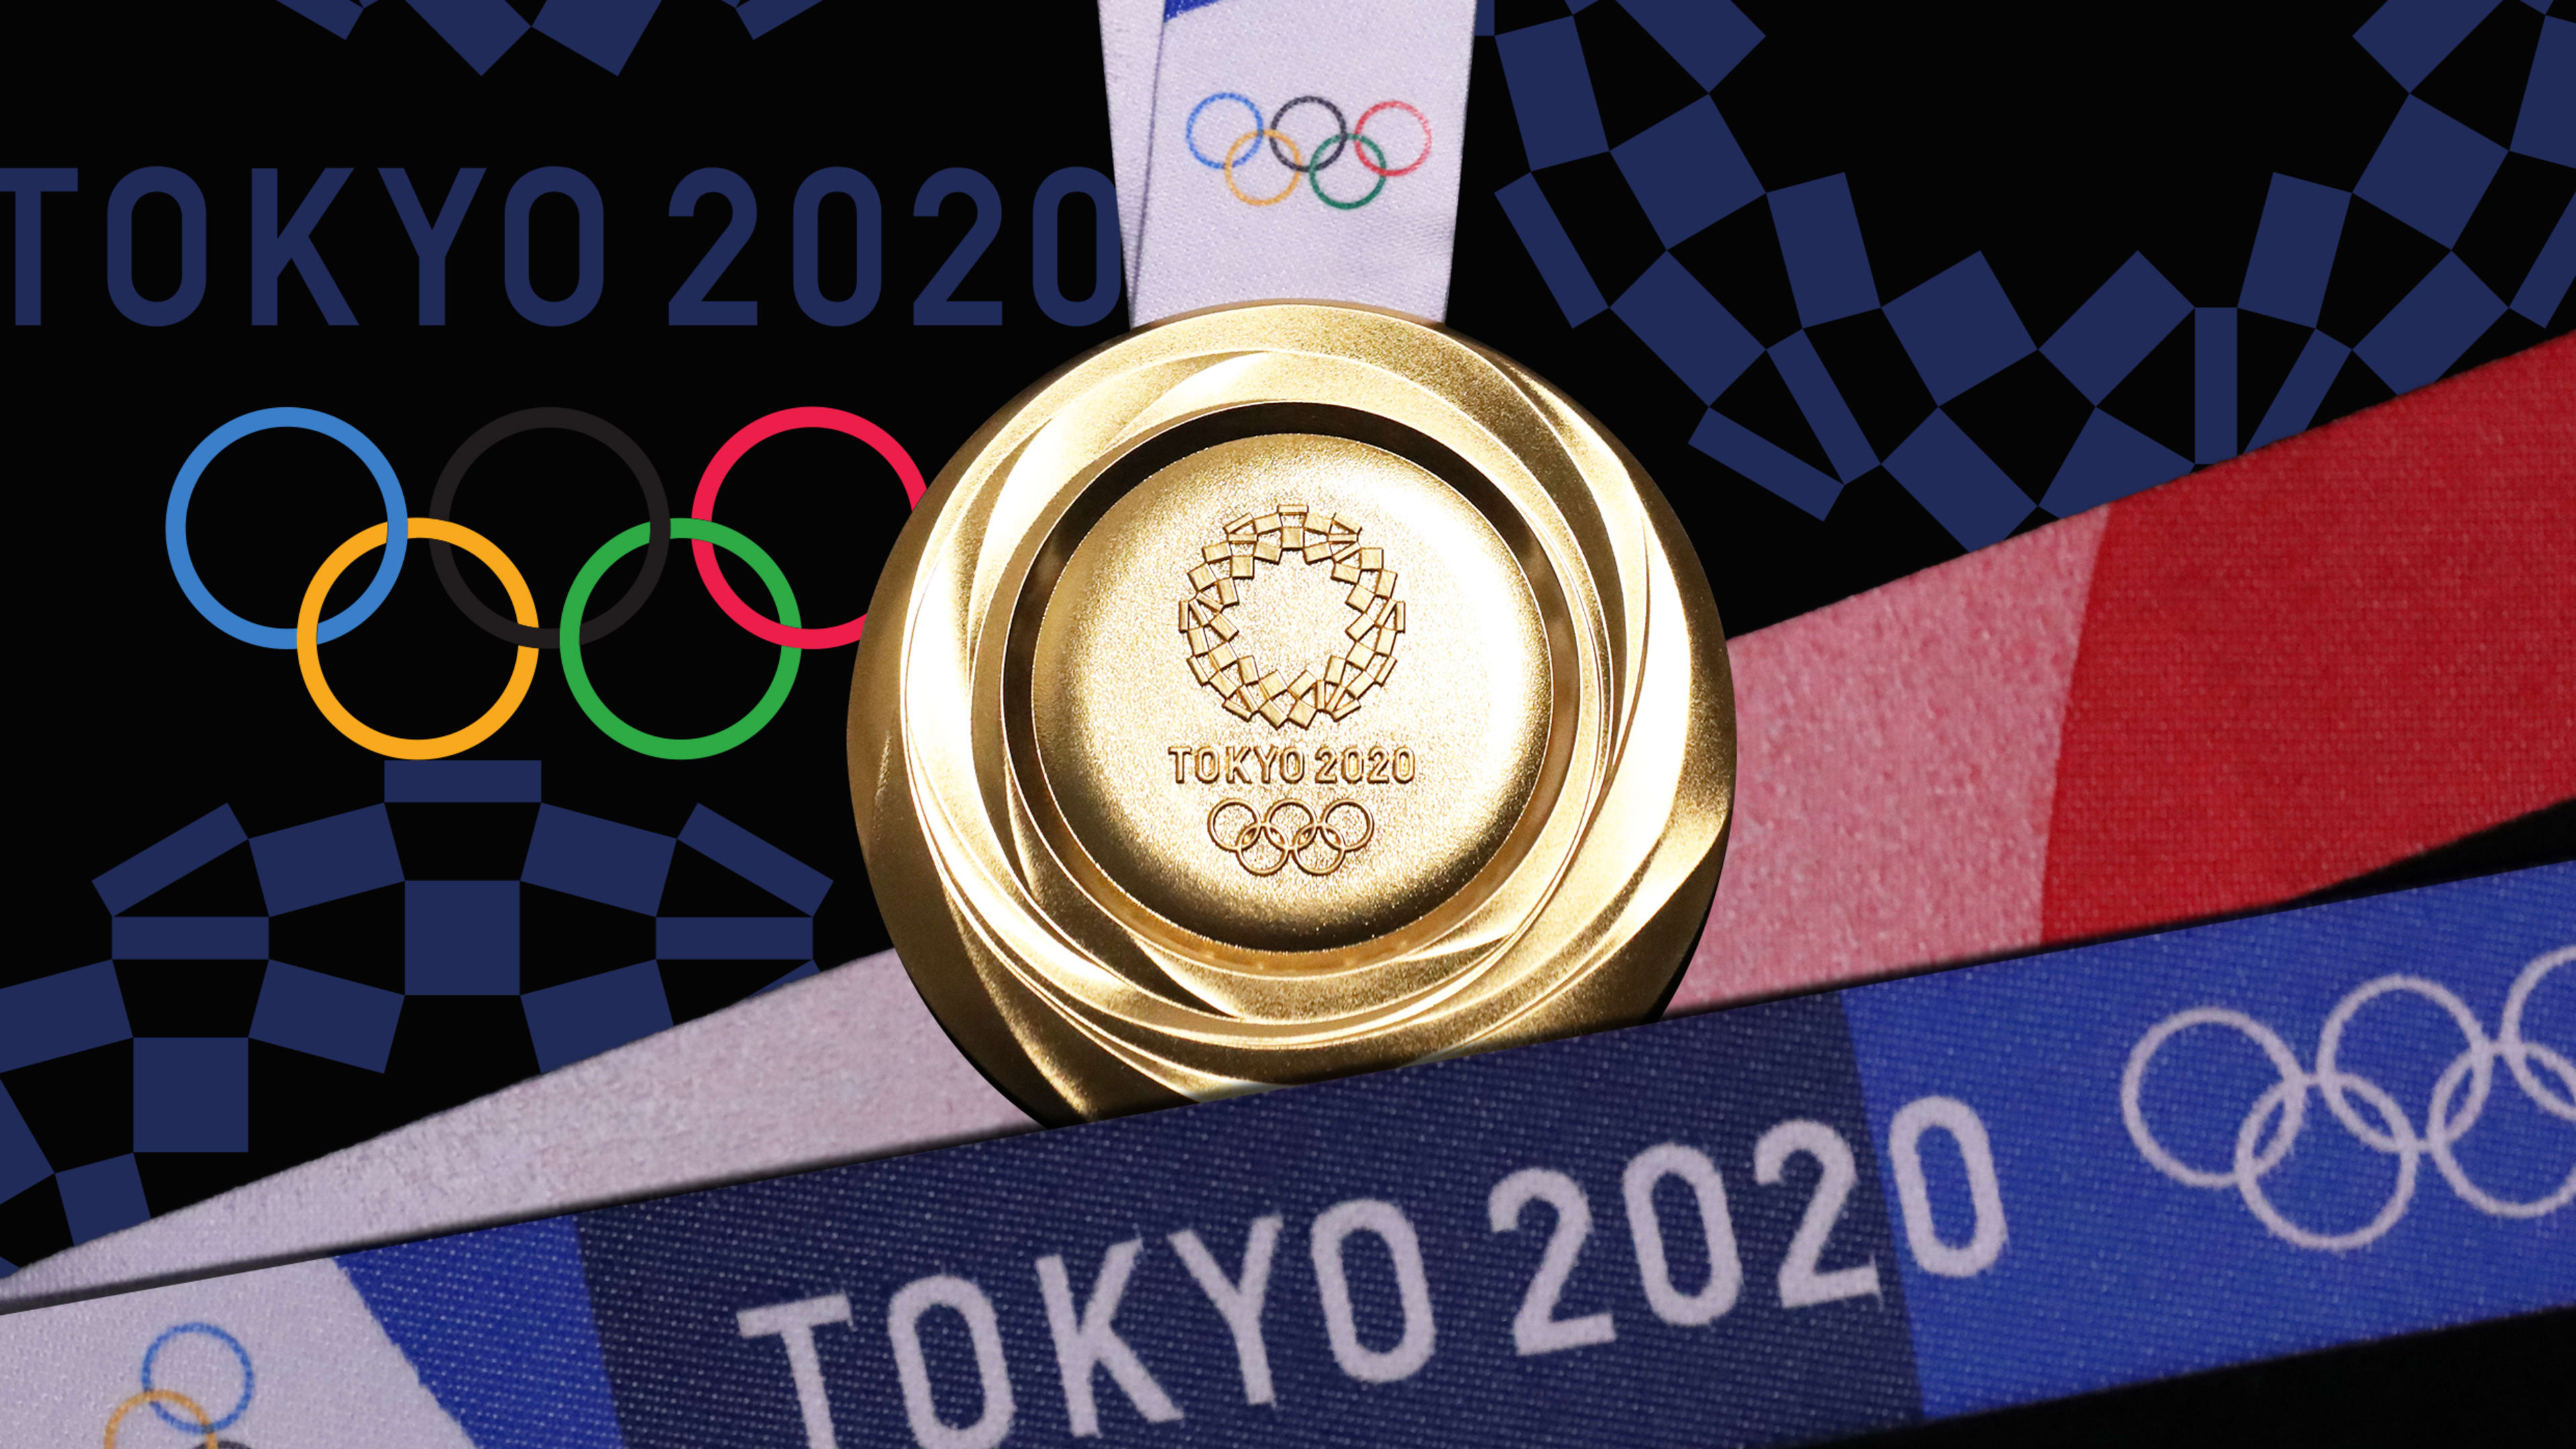 The Olympics will be in 2021. The branding will still say ‘2020’